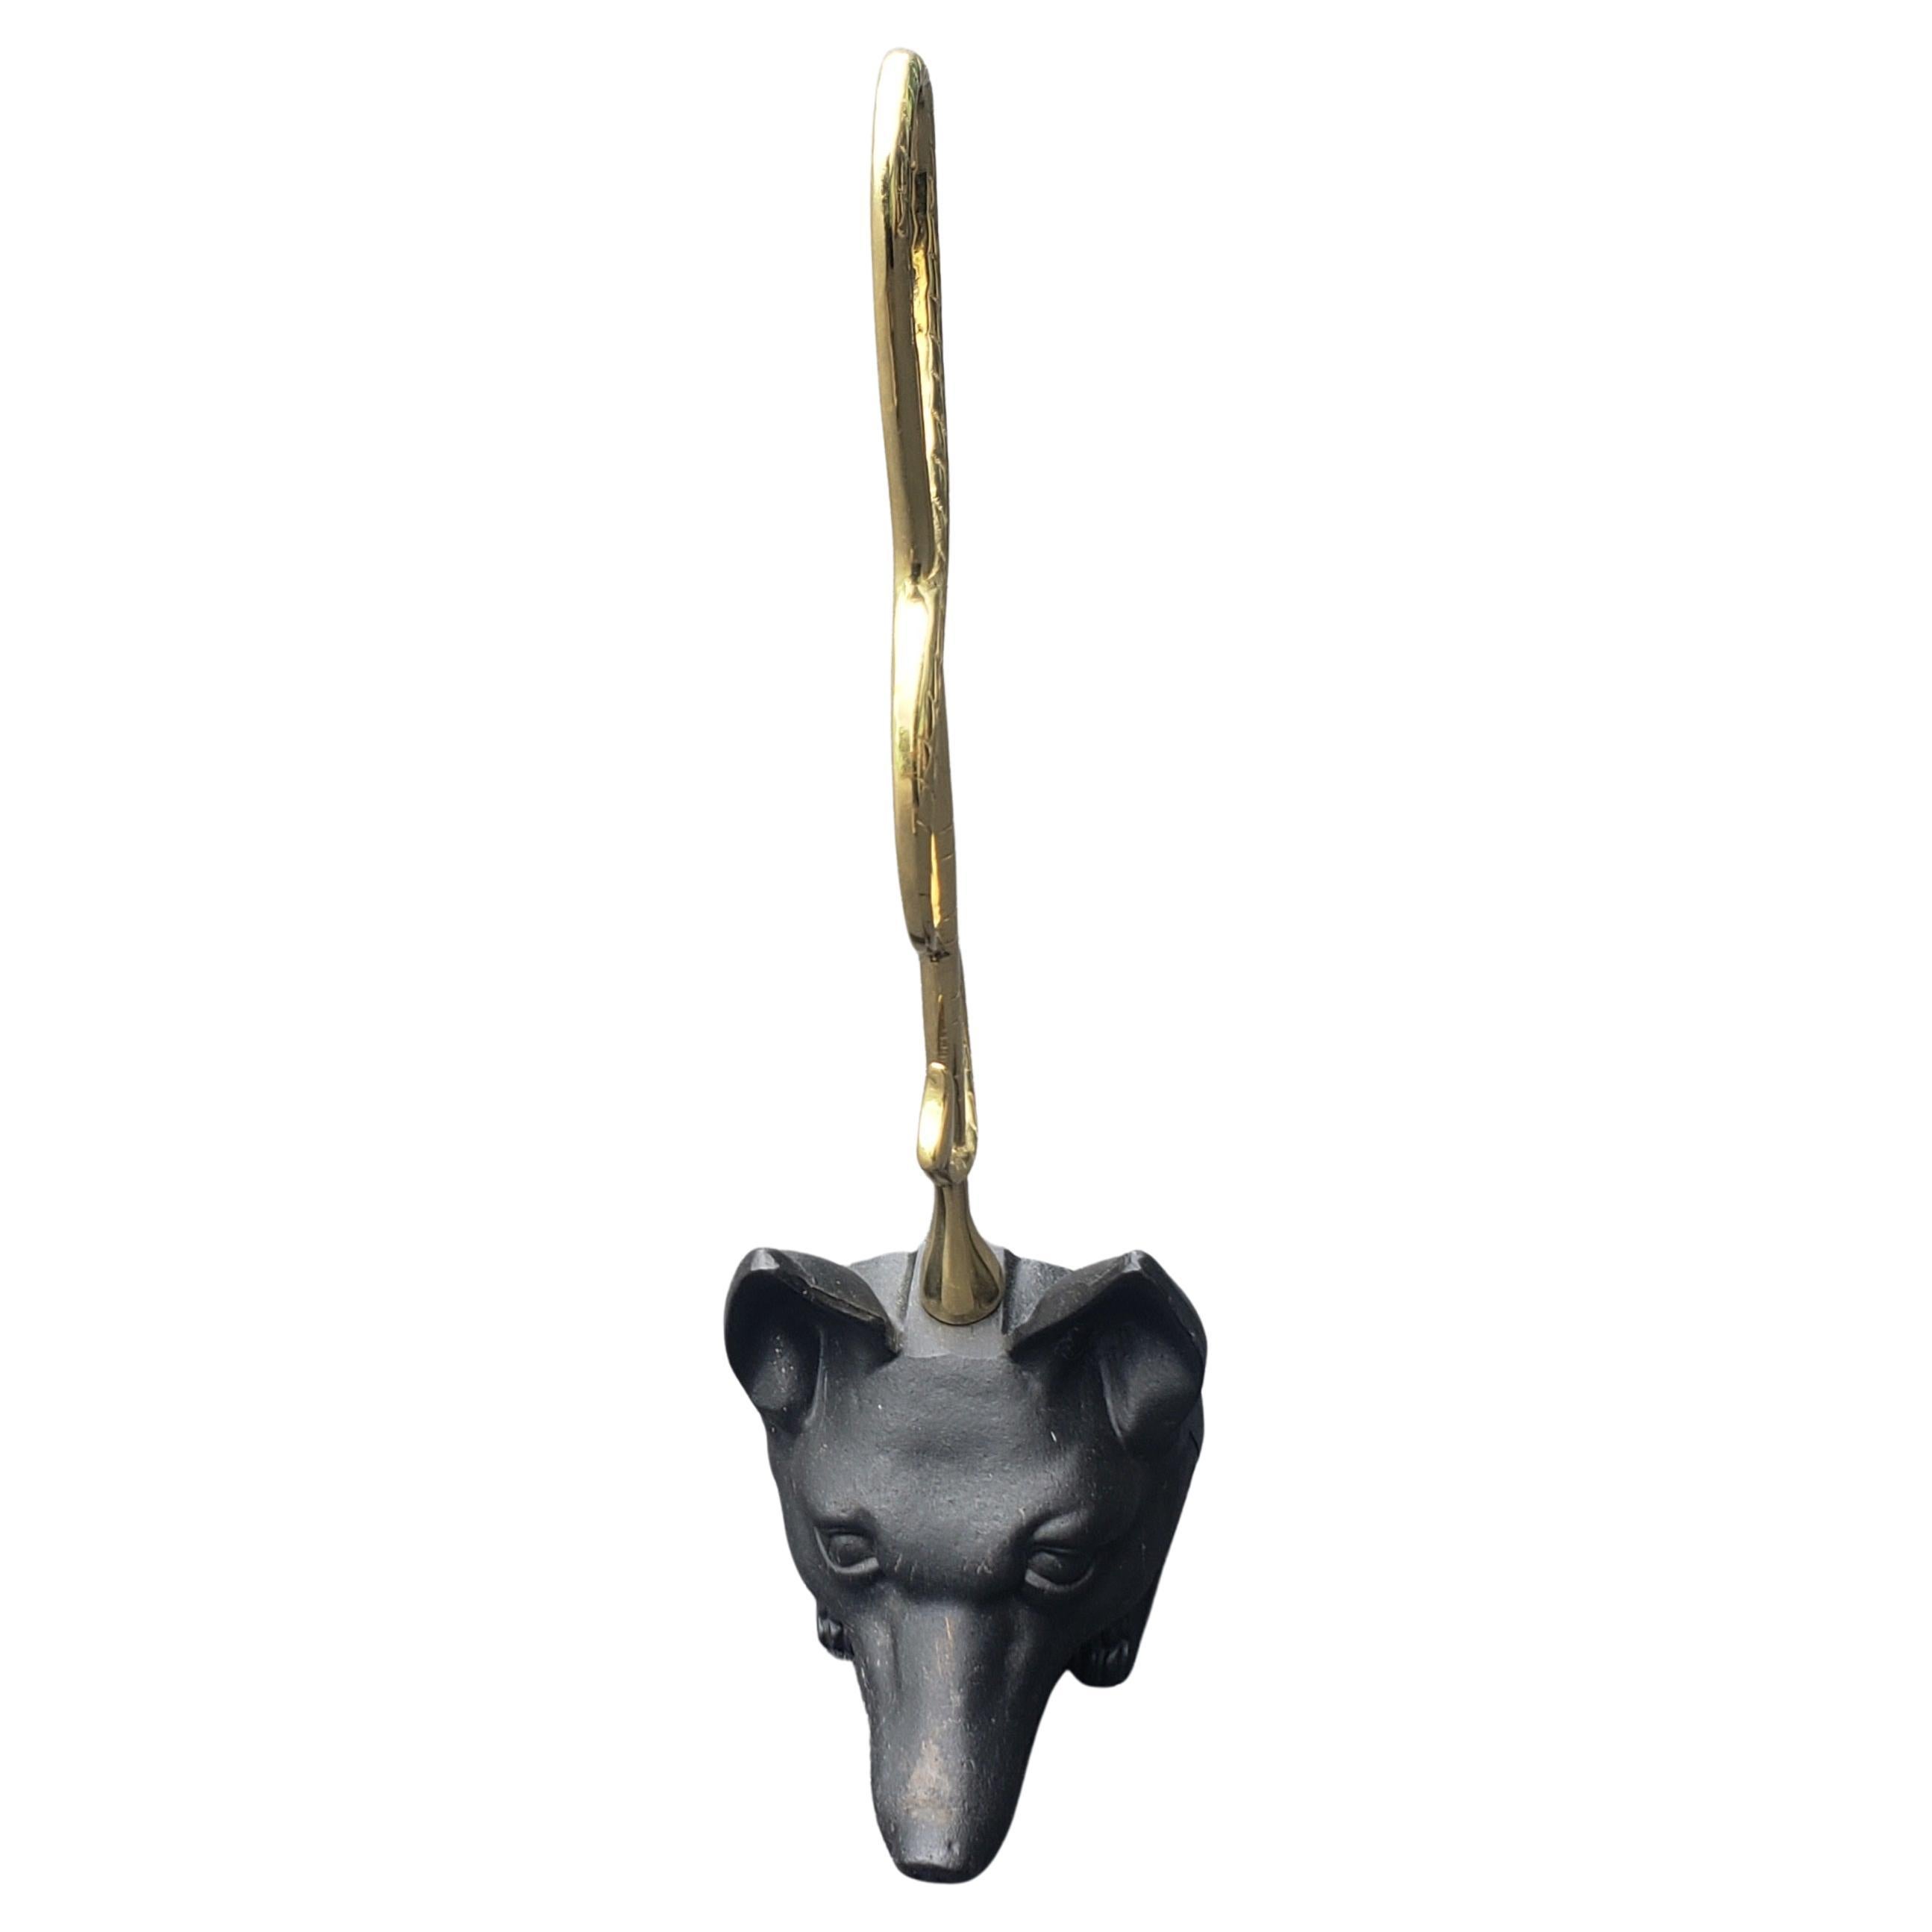 Brass and Iron Door Stop with Fox Head and Riding Crop